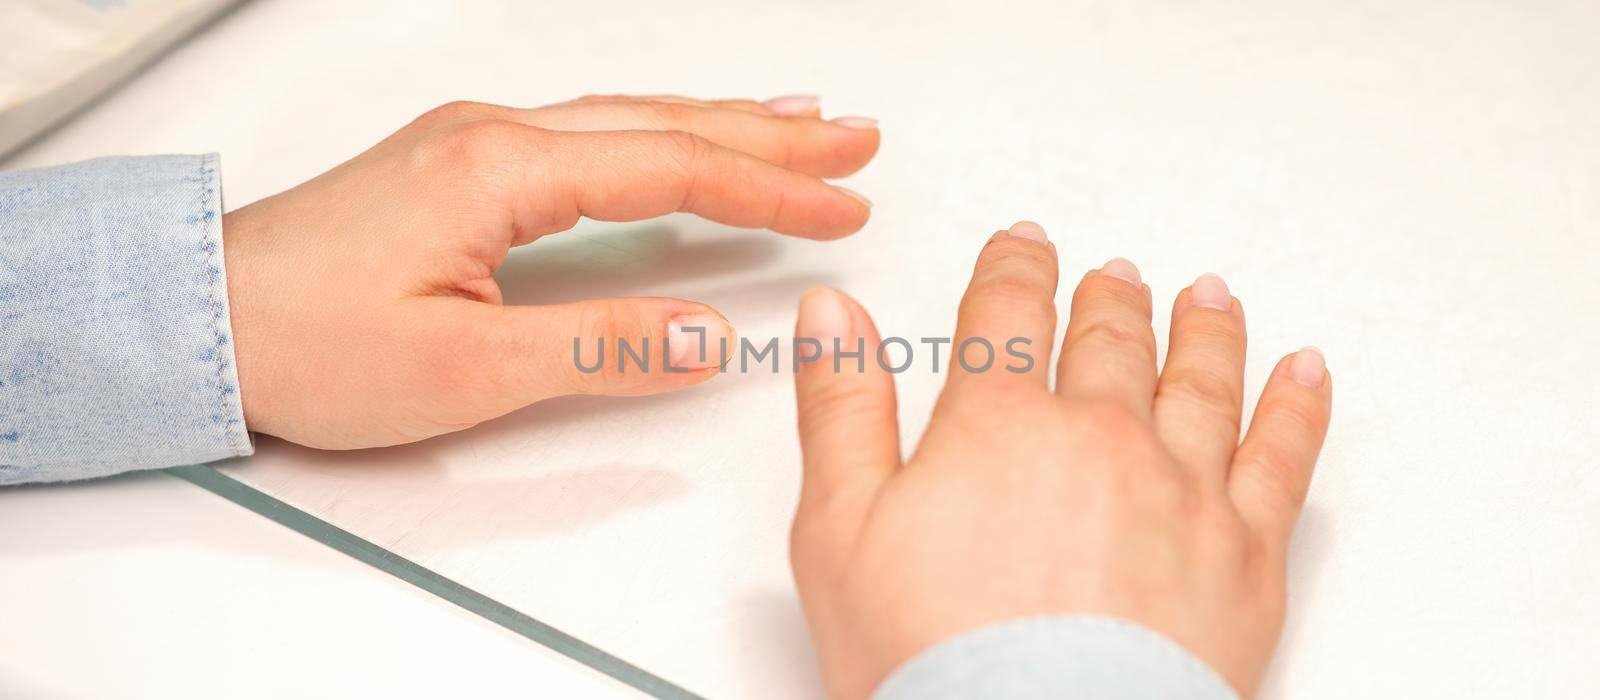 Hands of a young woman with well-groomed nails on the manicure table